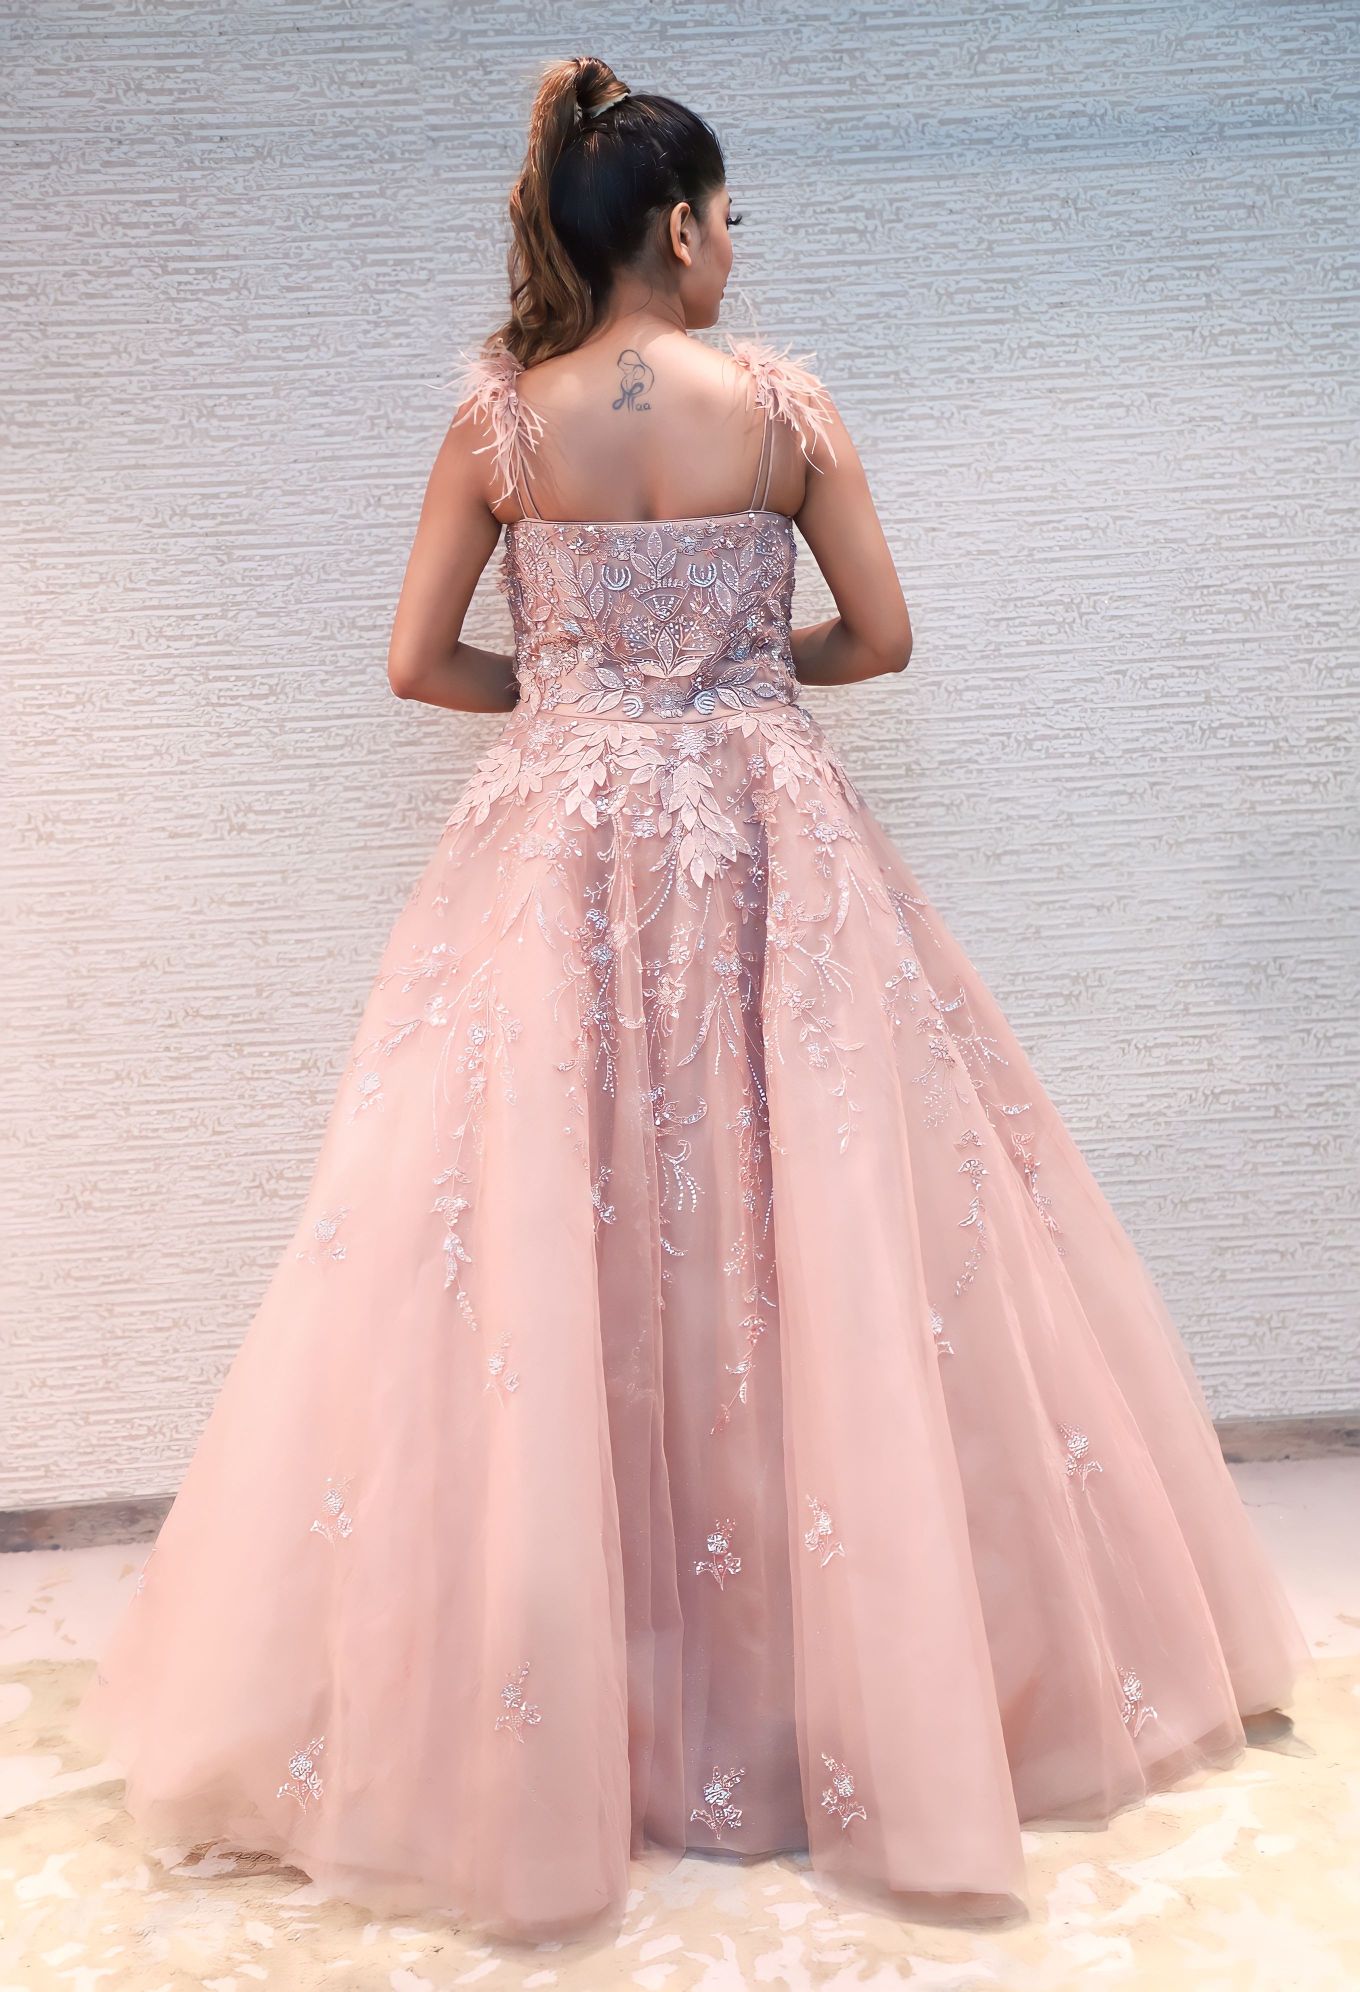 classic peach color floral motif embroidered gown